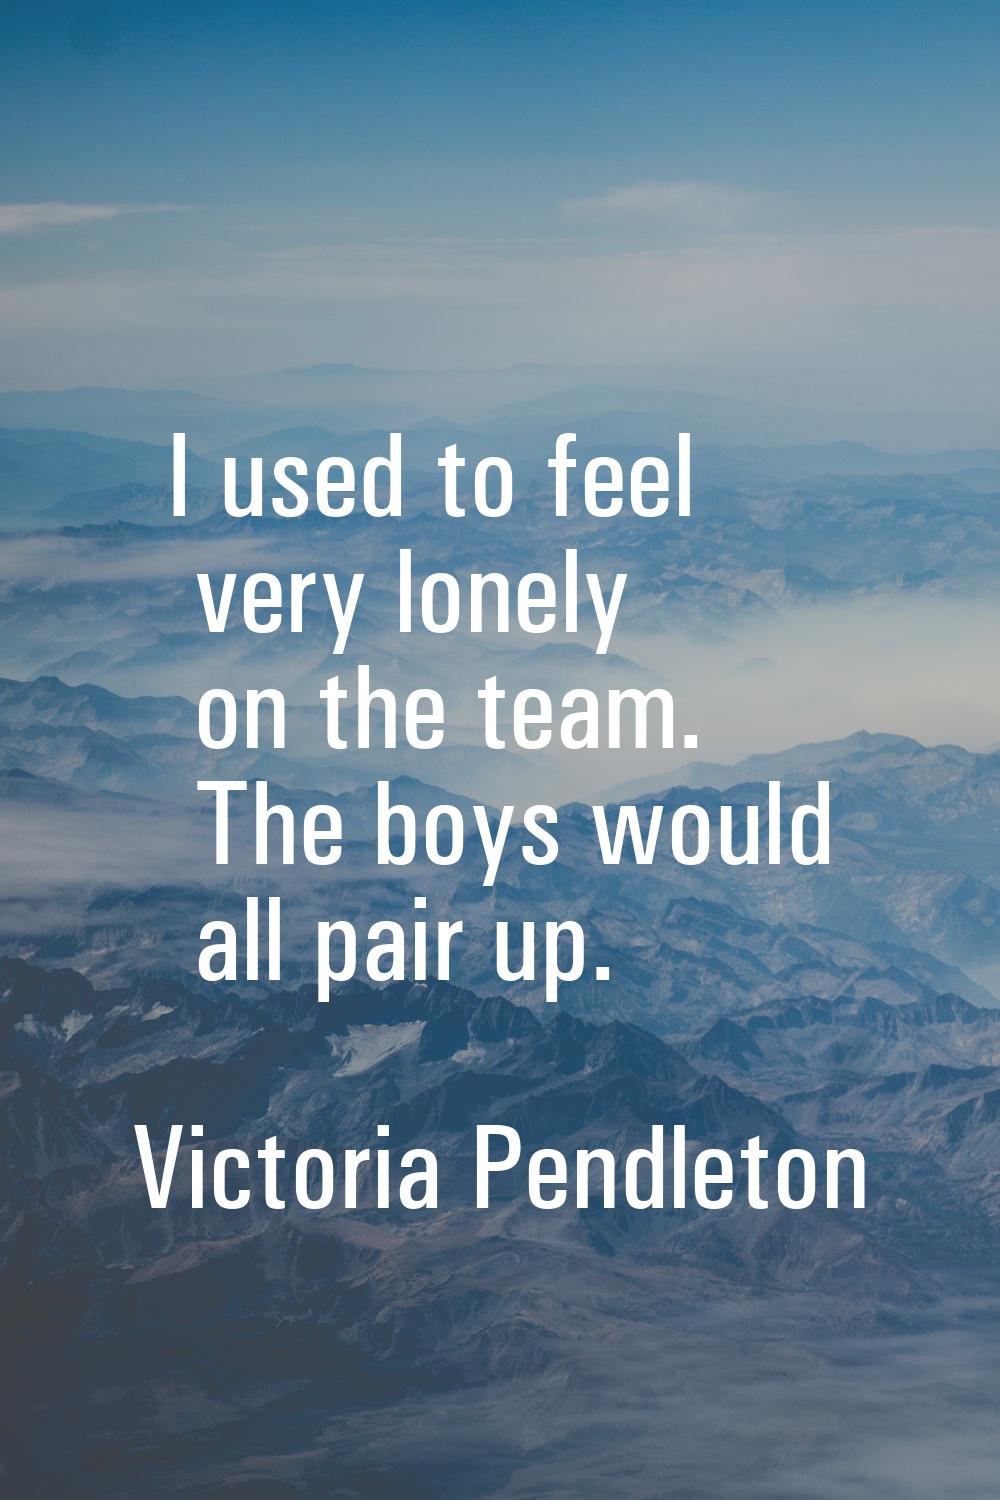 I used to feel very lonely on the team. The boys would all pair up.